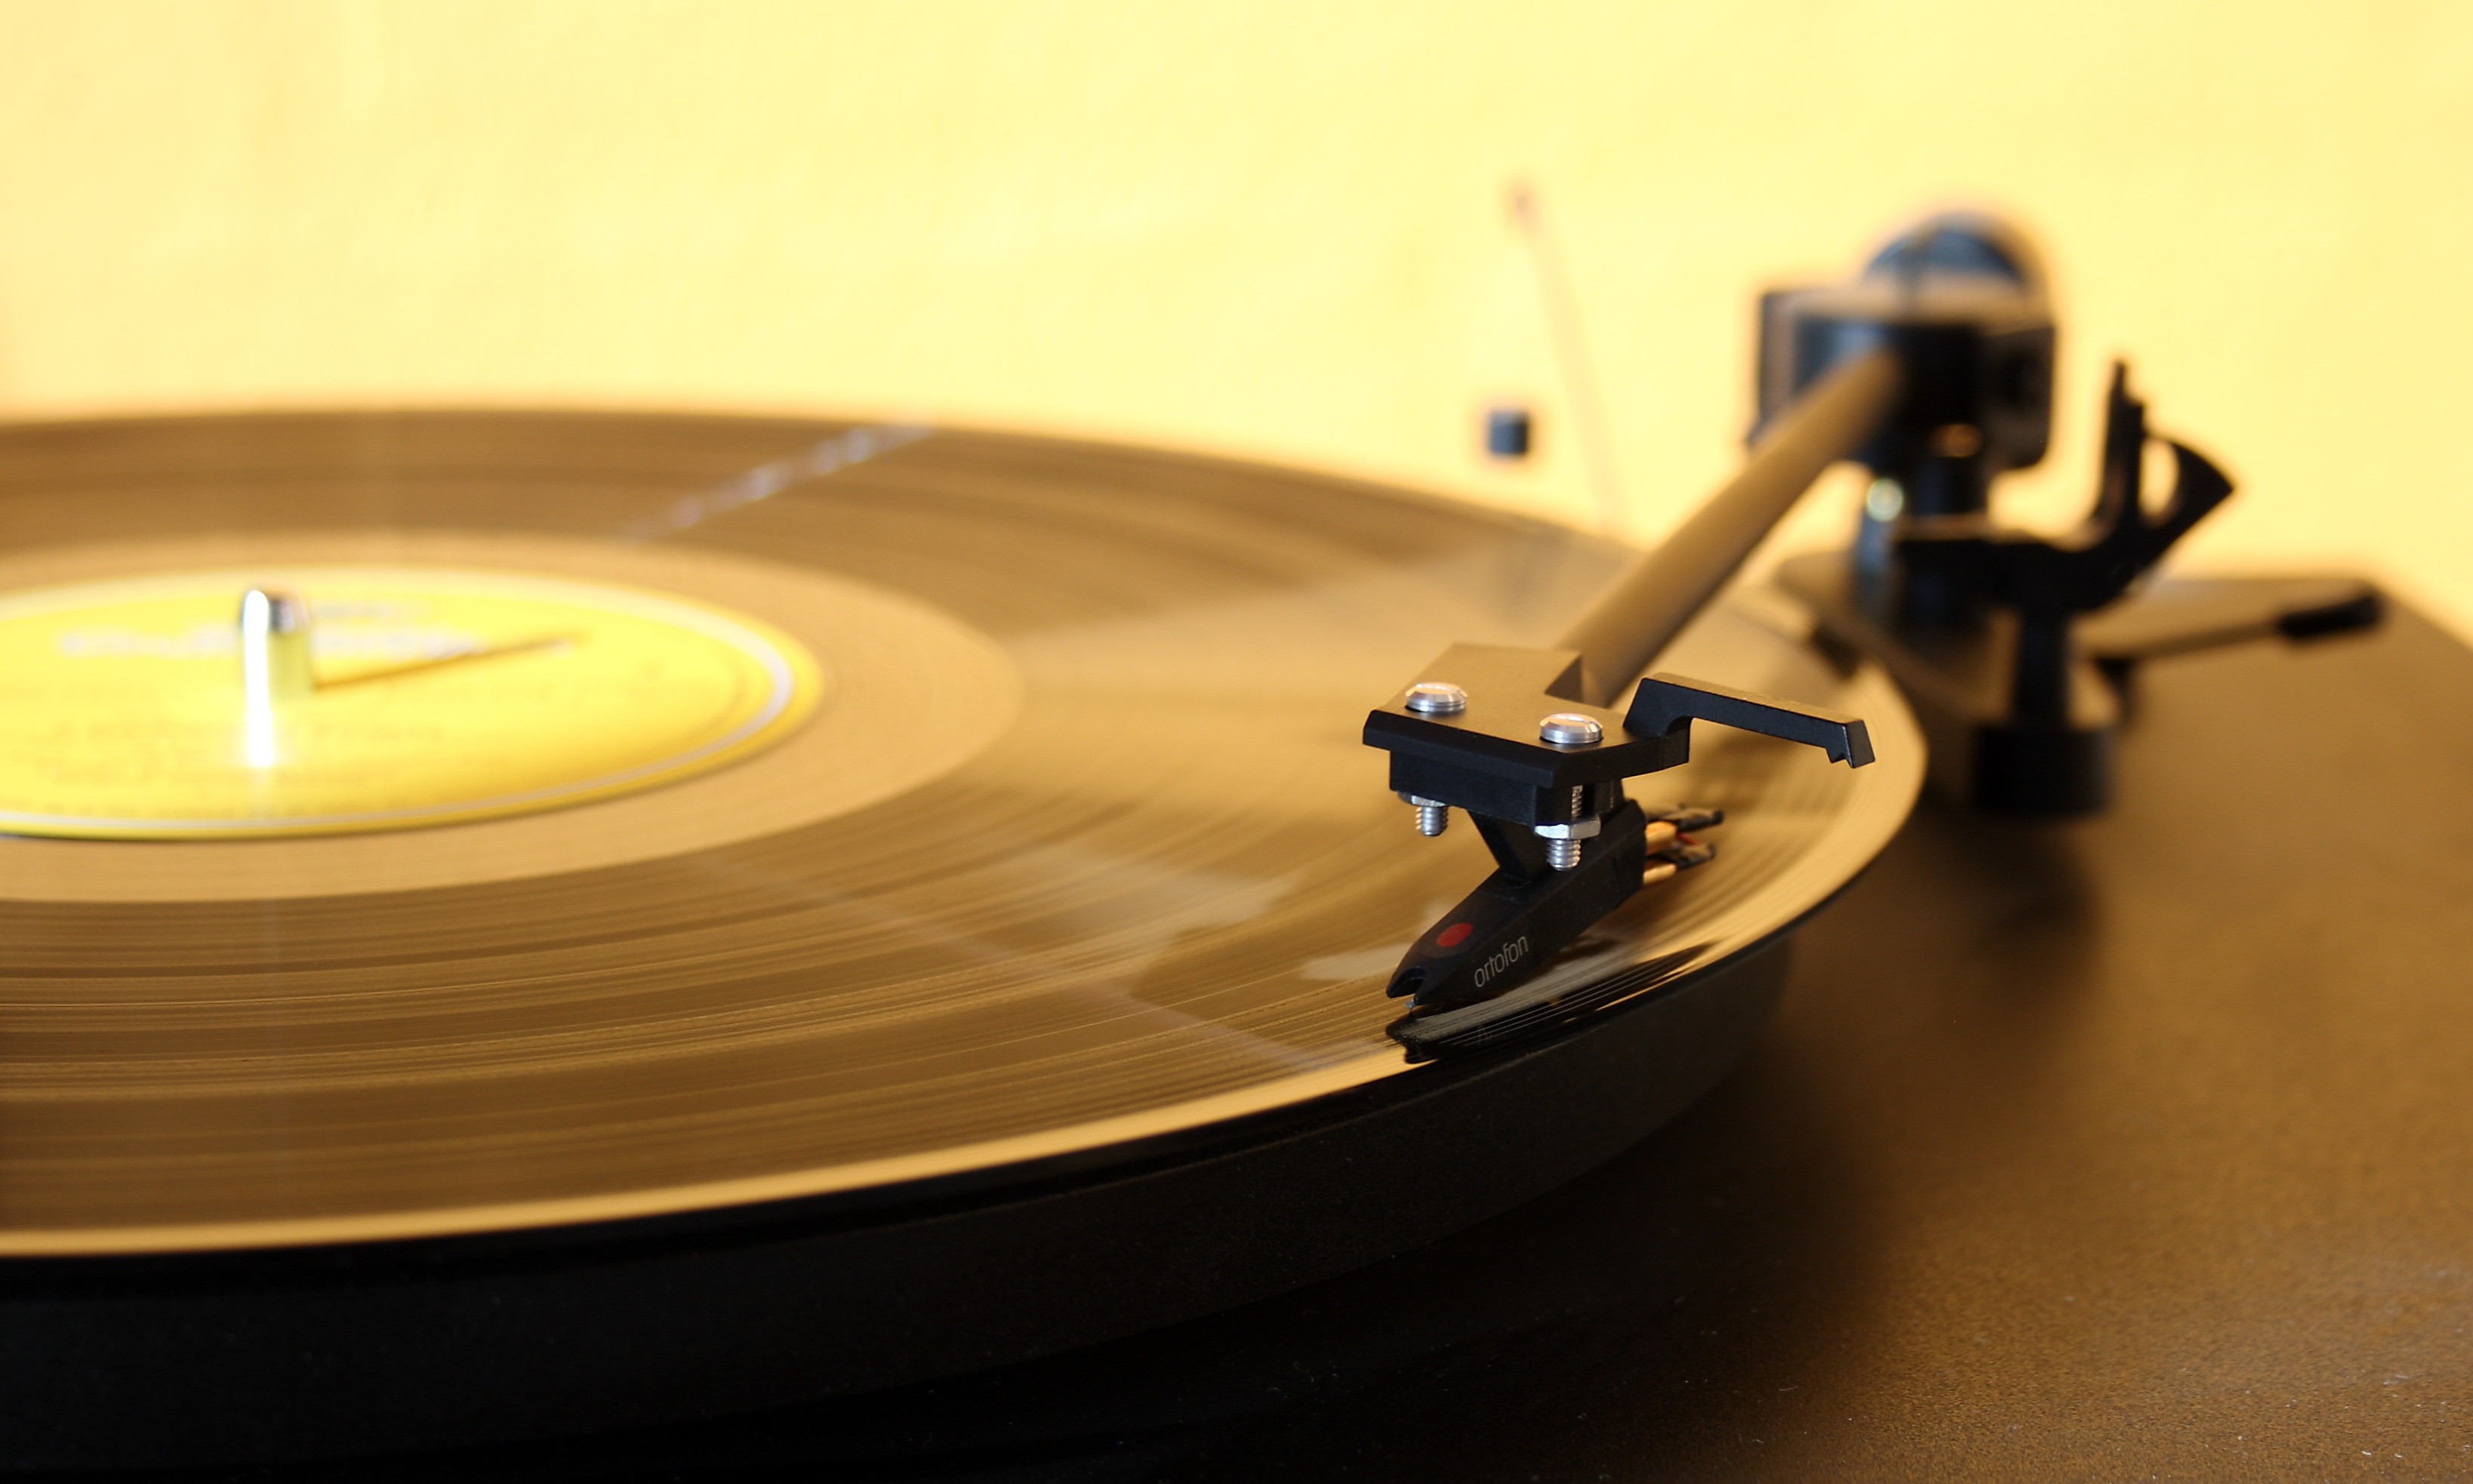 Old-fashioned record player and record by SteenJepsen